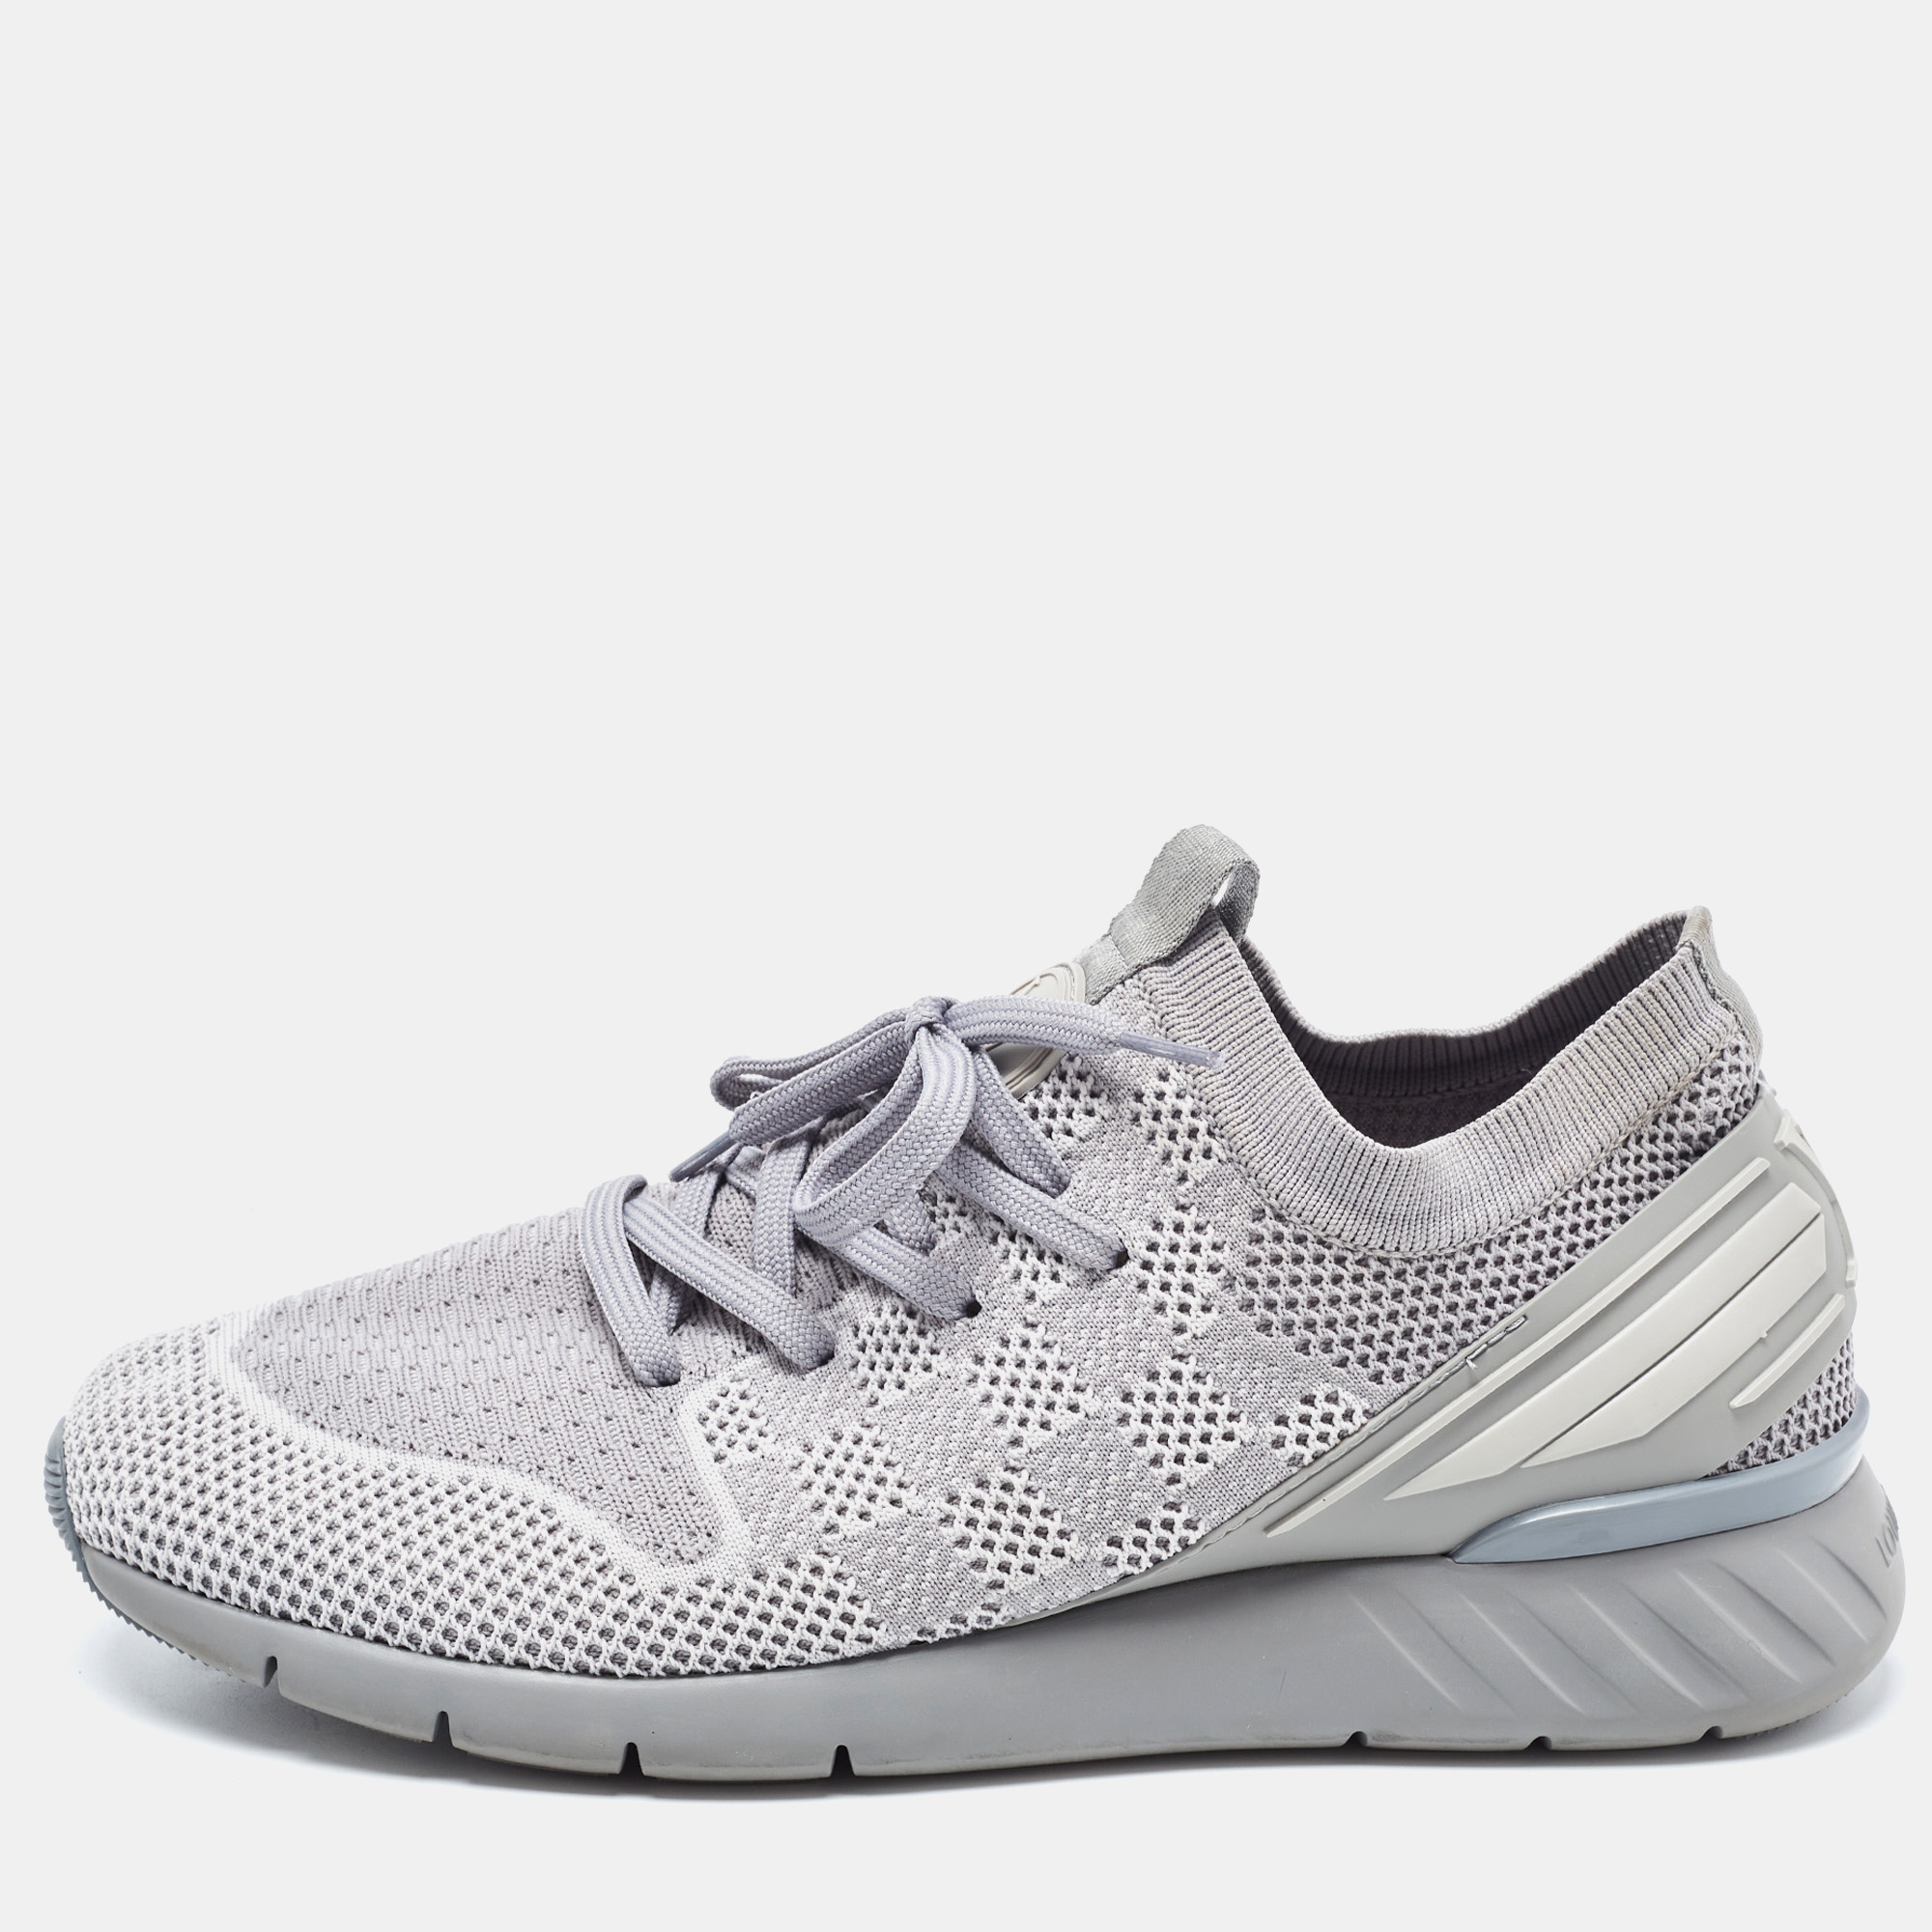 Pre-owned Louis Vuitton Grey Knit Fabric Fastlane Trainers Size 41